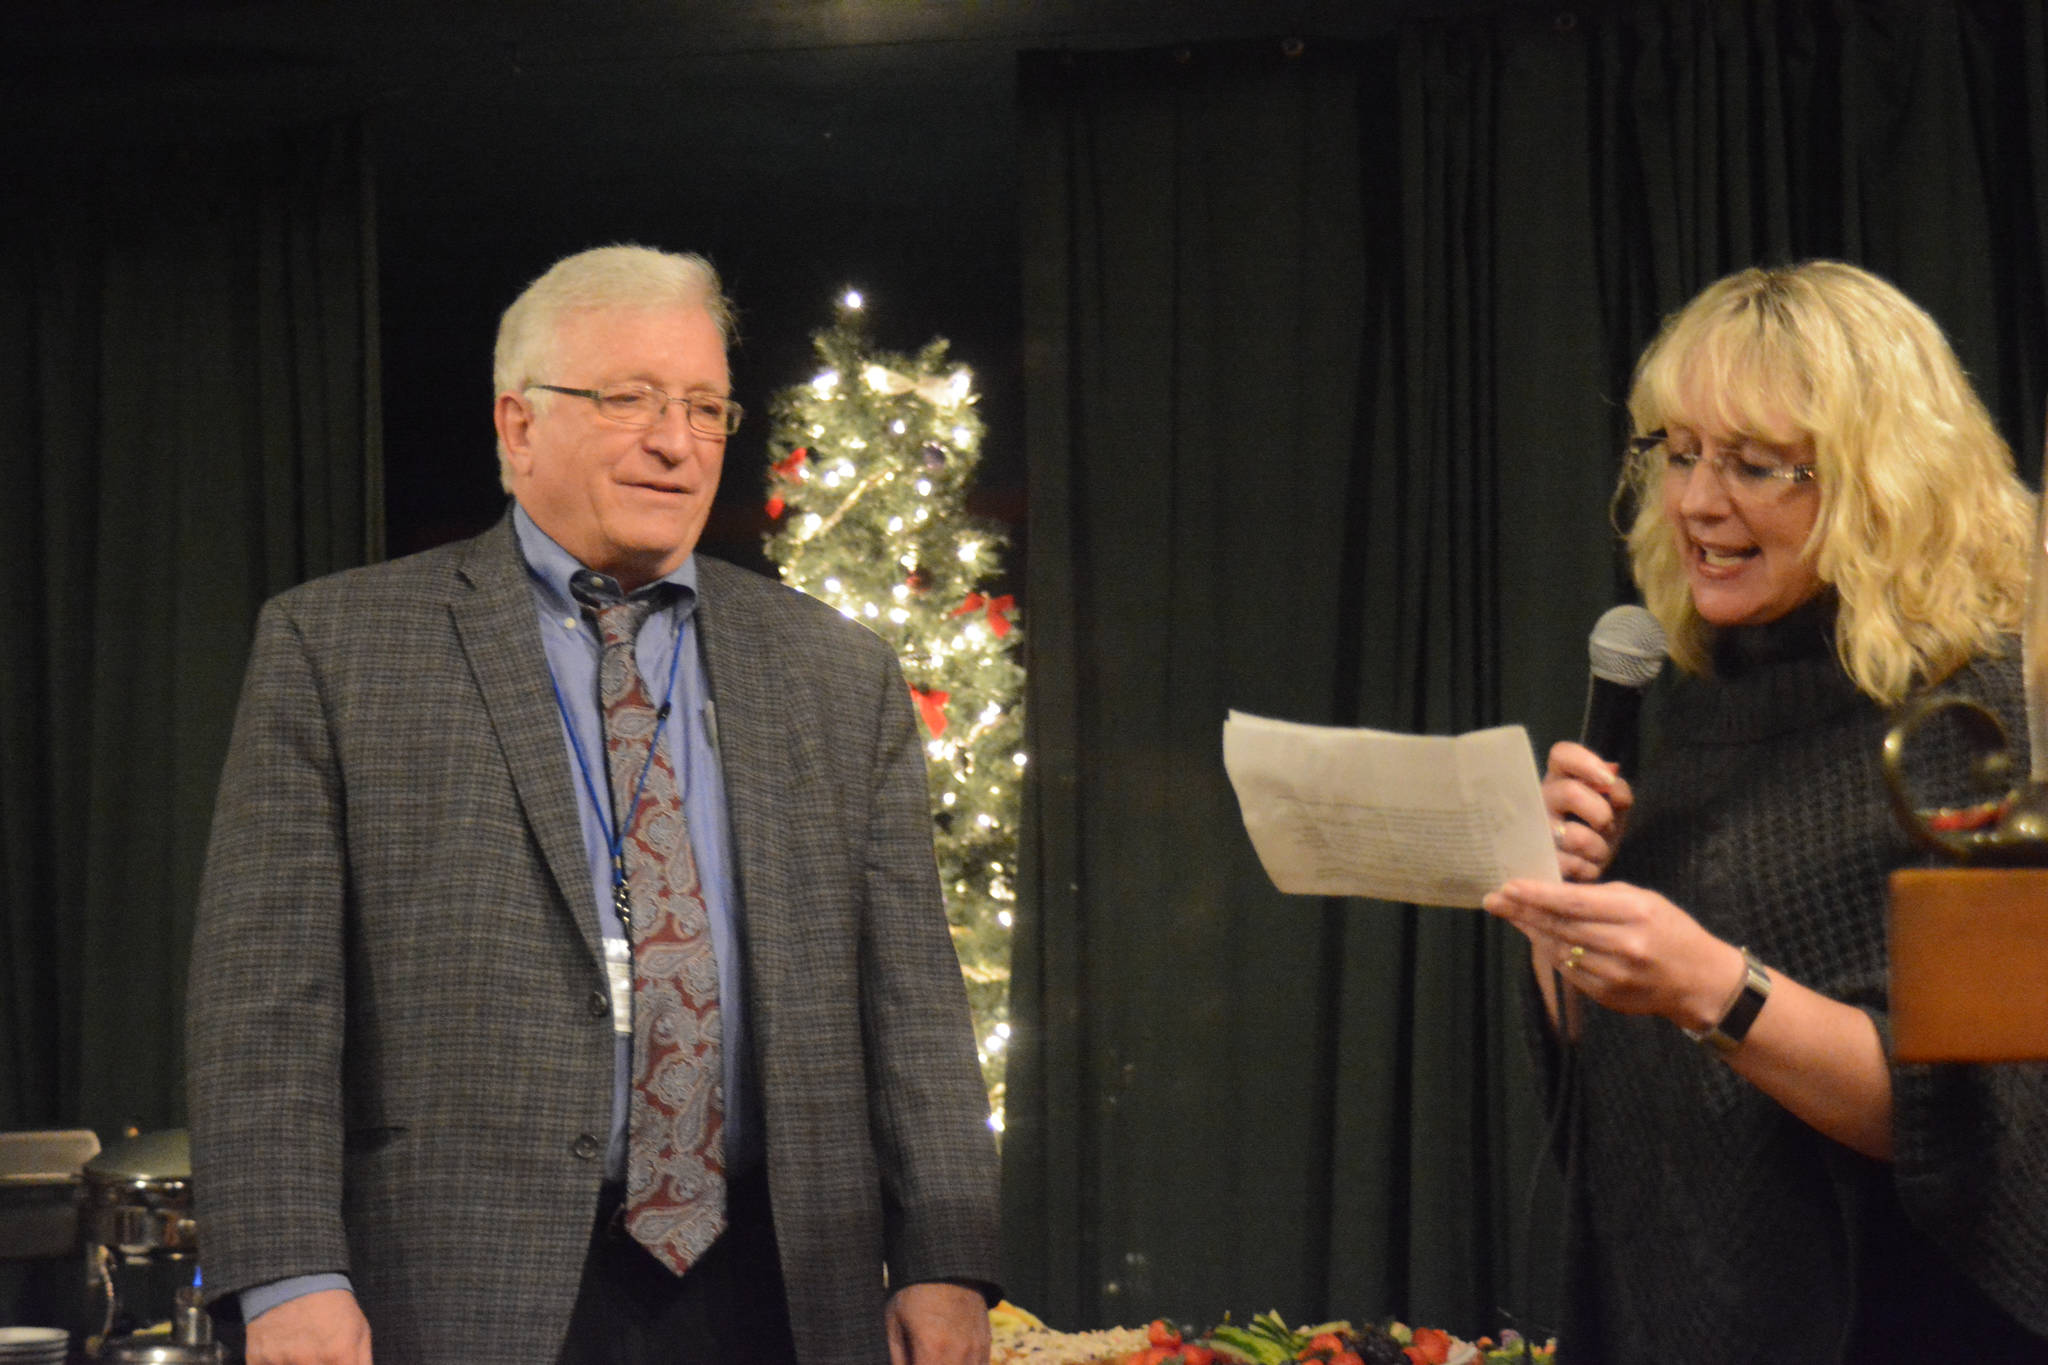 Julie Woodworth, president of the South Peninsula Hospital Board of Directors, praises SPH CEO Bob Letson at a going-away party last Thursday, Nov. 30, 2017 at AJ’s OldTown Steakhouse in Homer, Alaska. Woodworth listed his accomplishments over the past 10 years of his service, including expanding health services, steering new construction, adding new physicians and health providers, and tripling hospital revenues. “Bob has been committed to SPH and community. He wore the hat of CEO seven days a week and was on call all the time,” she said. “…He has created a thriving rural, community hospital. Thank you, Bob. You’ve created a legacy.” (Photo by Michael Armstrong, Homer News)